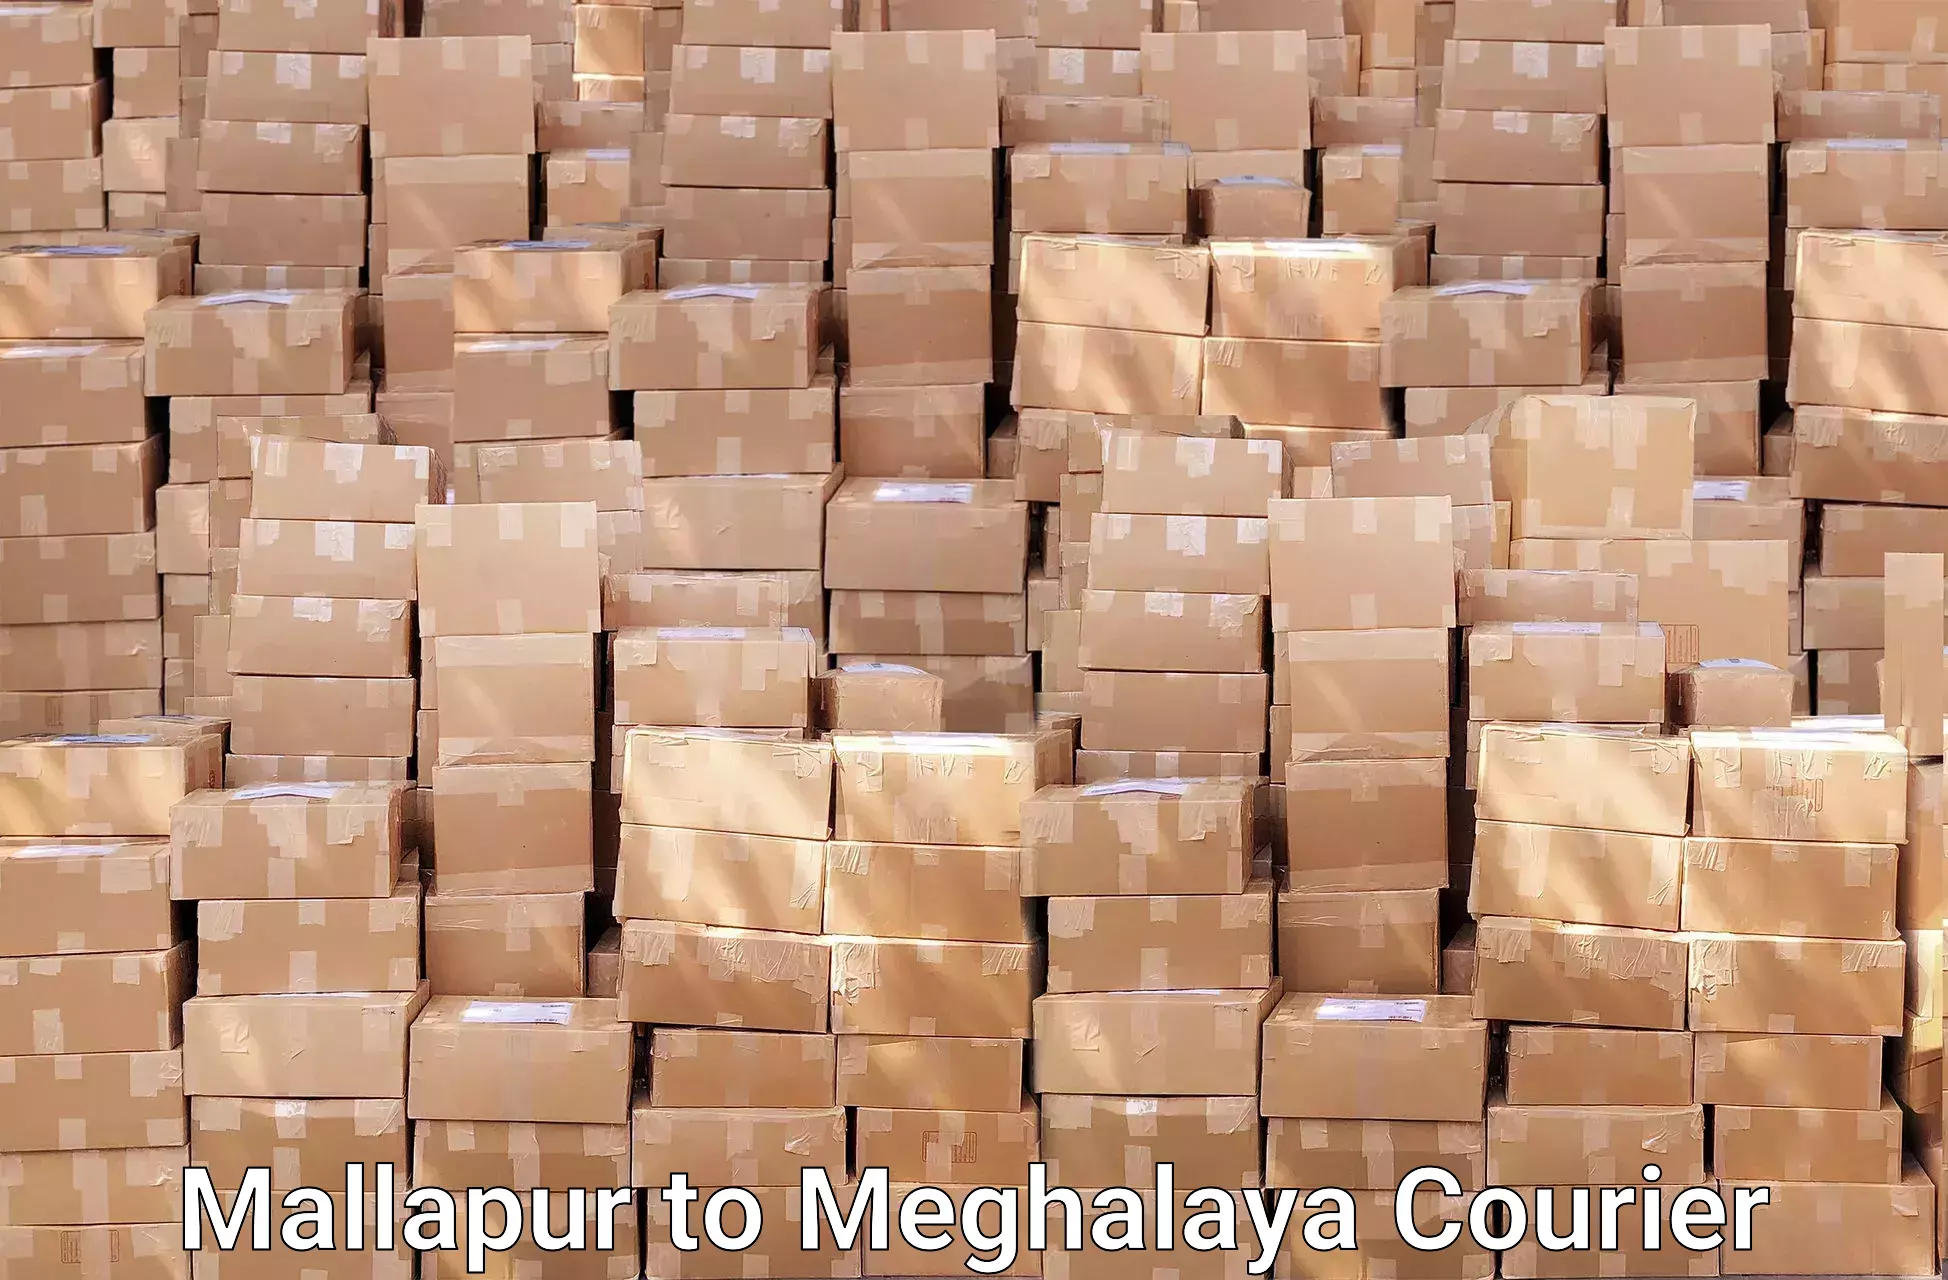 Quality moving and storage Mallapur to Shillong